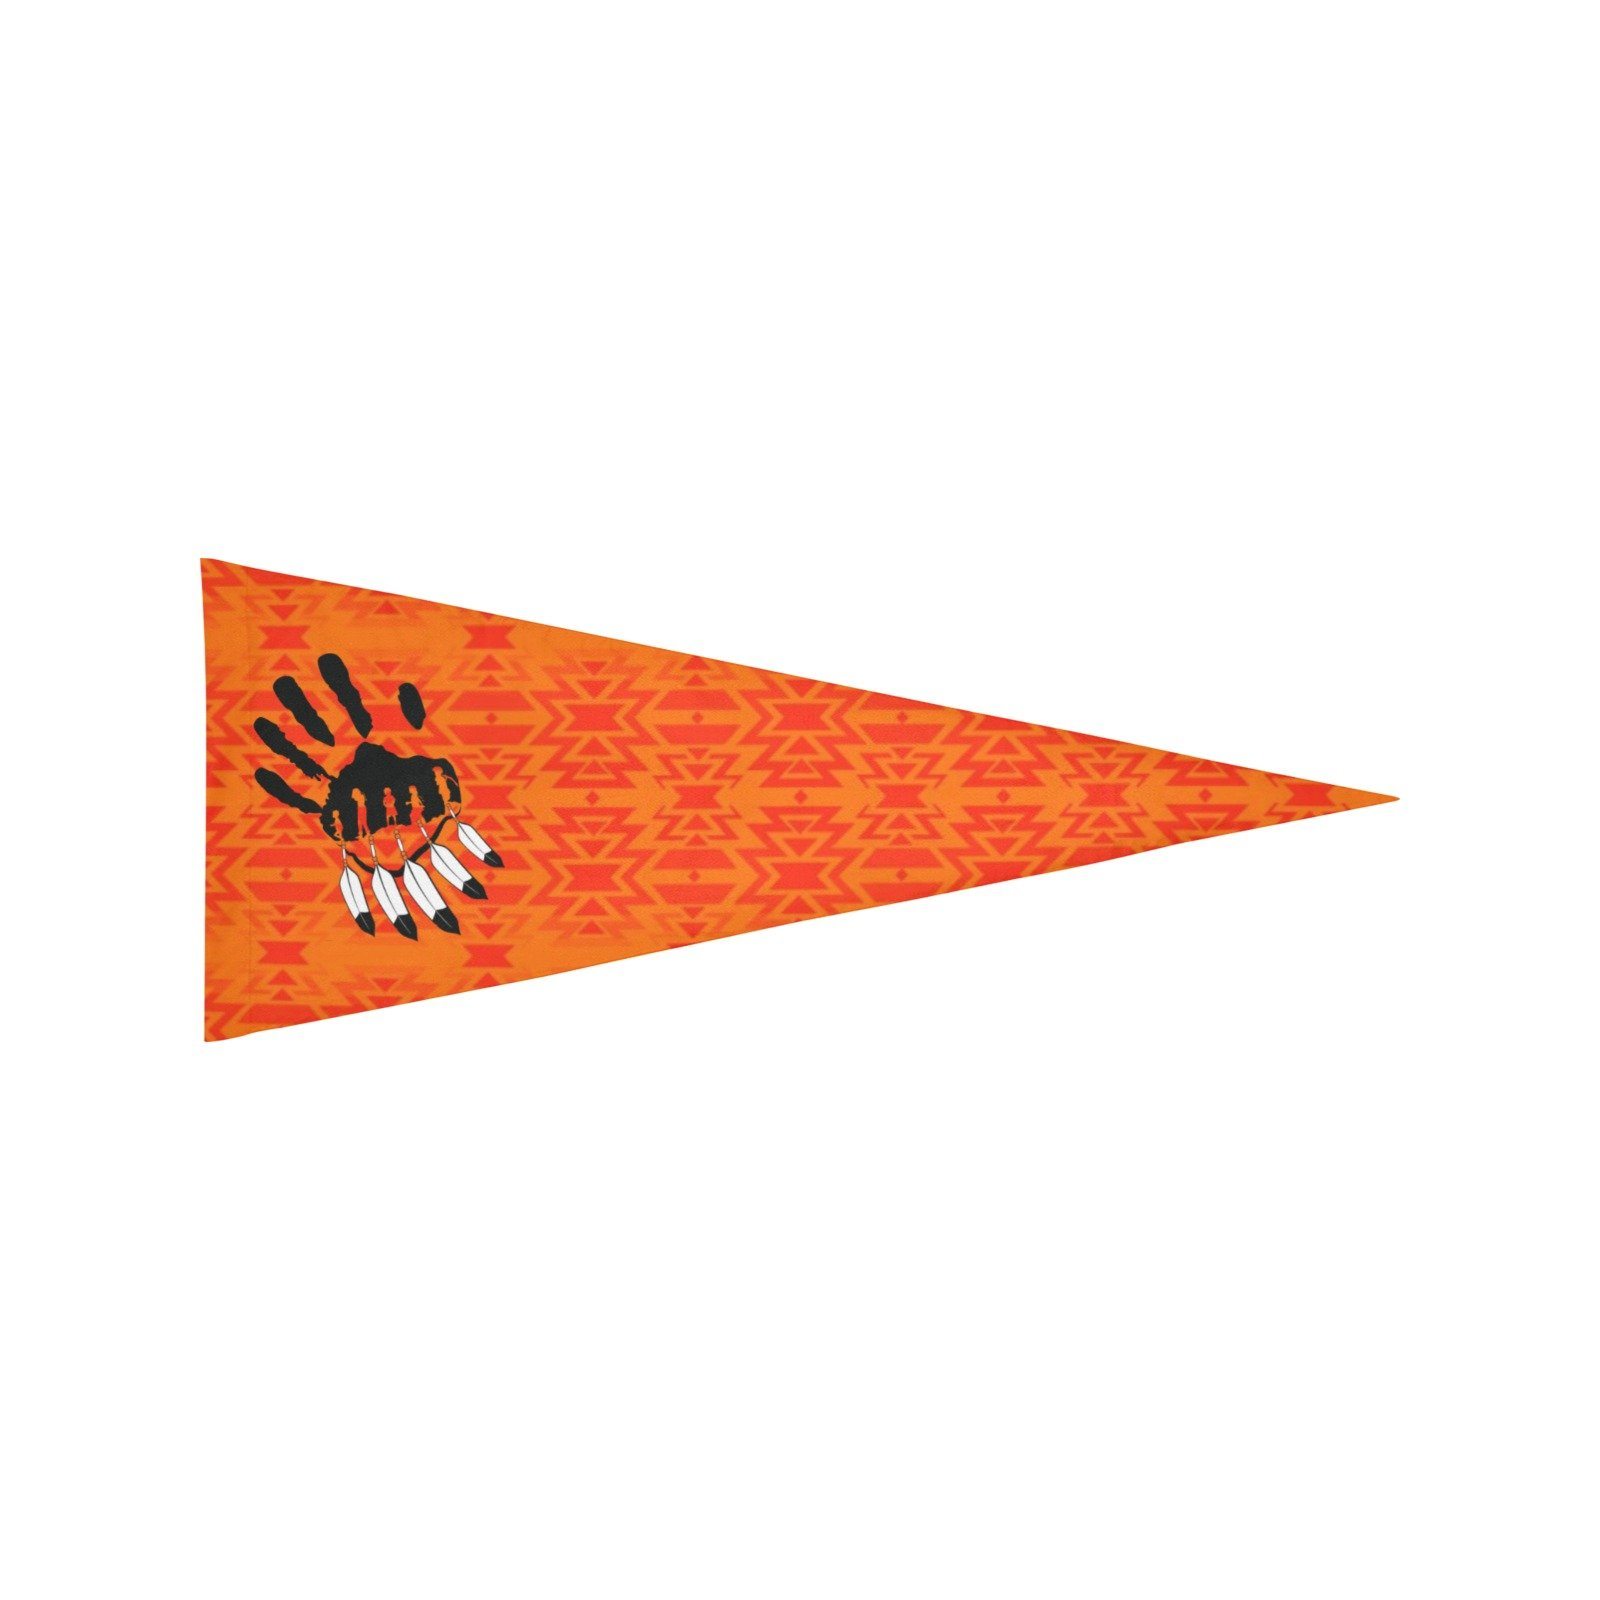 Fire Colors and Turquoise Orange A feather for each Trigonal Garden Flag 30"x12" Trigonal Garden Flag 30"x12" e-joyer 